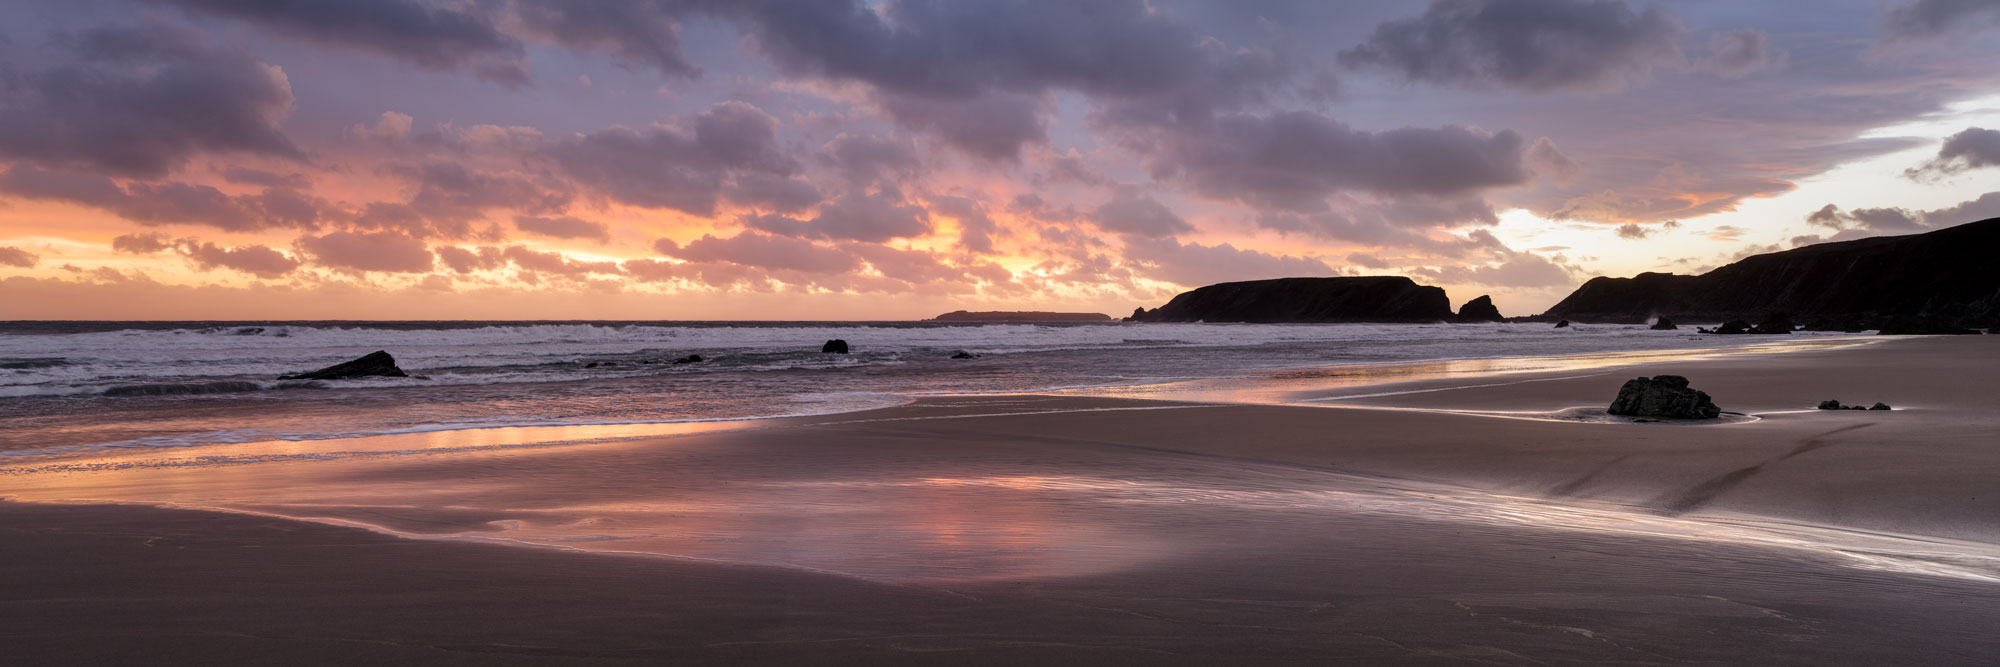 Panoramic print of Marloes Sands beach at sunset on the Pembrokeshire Coast